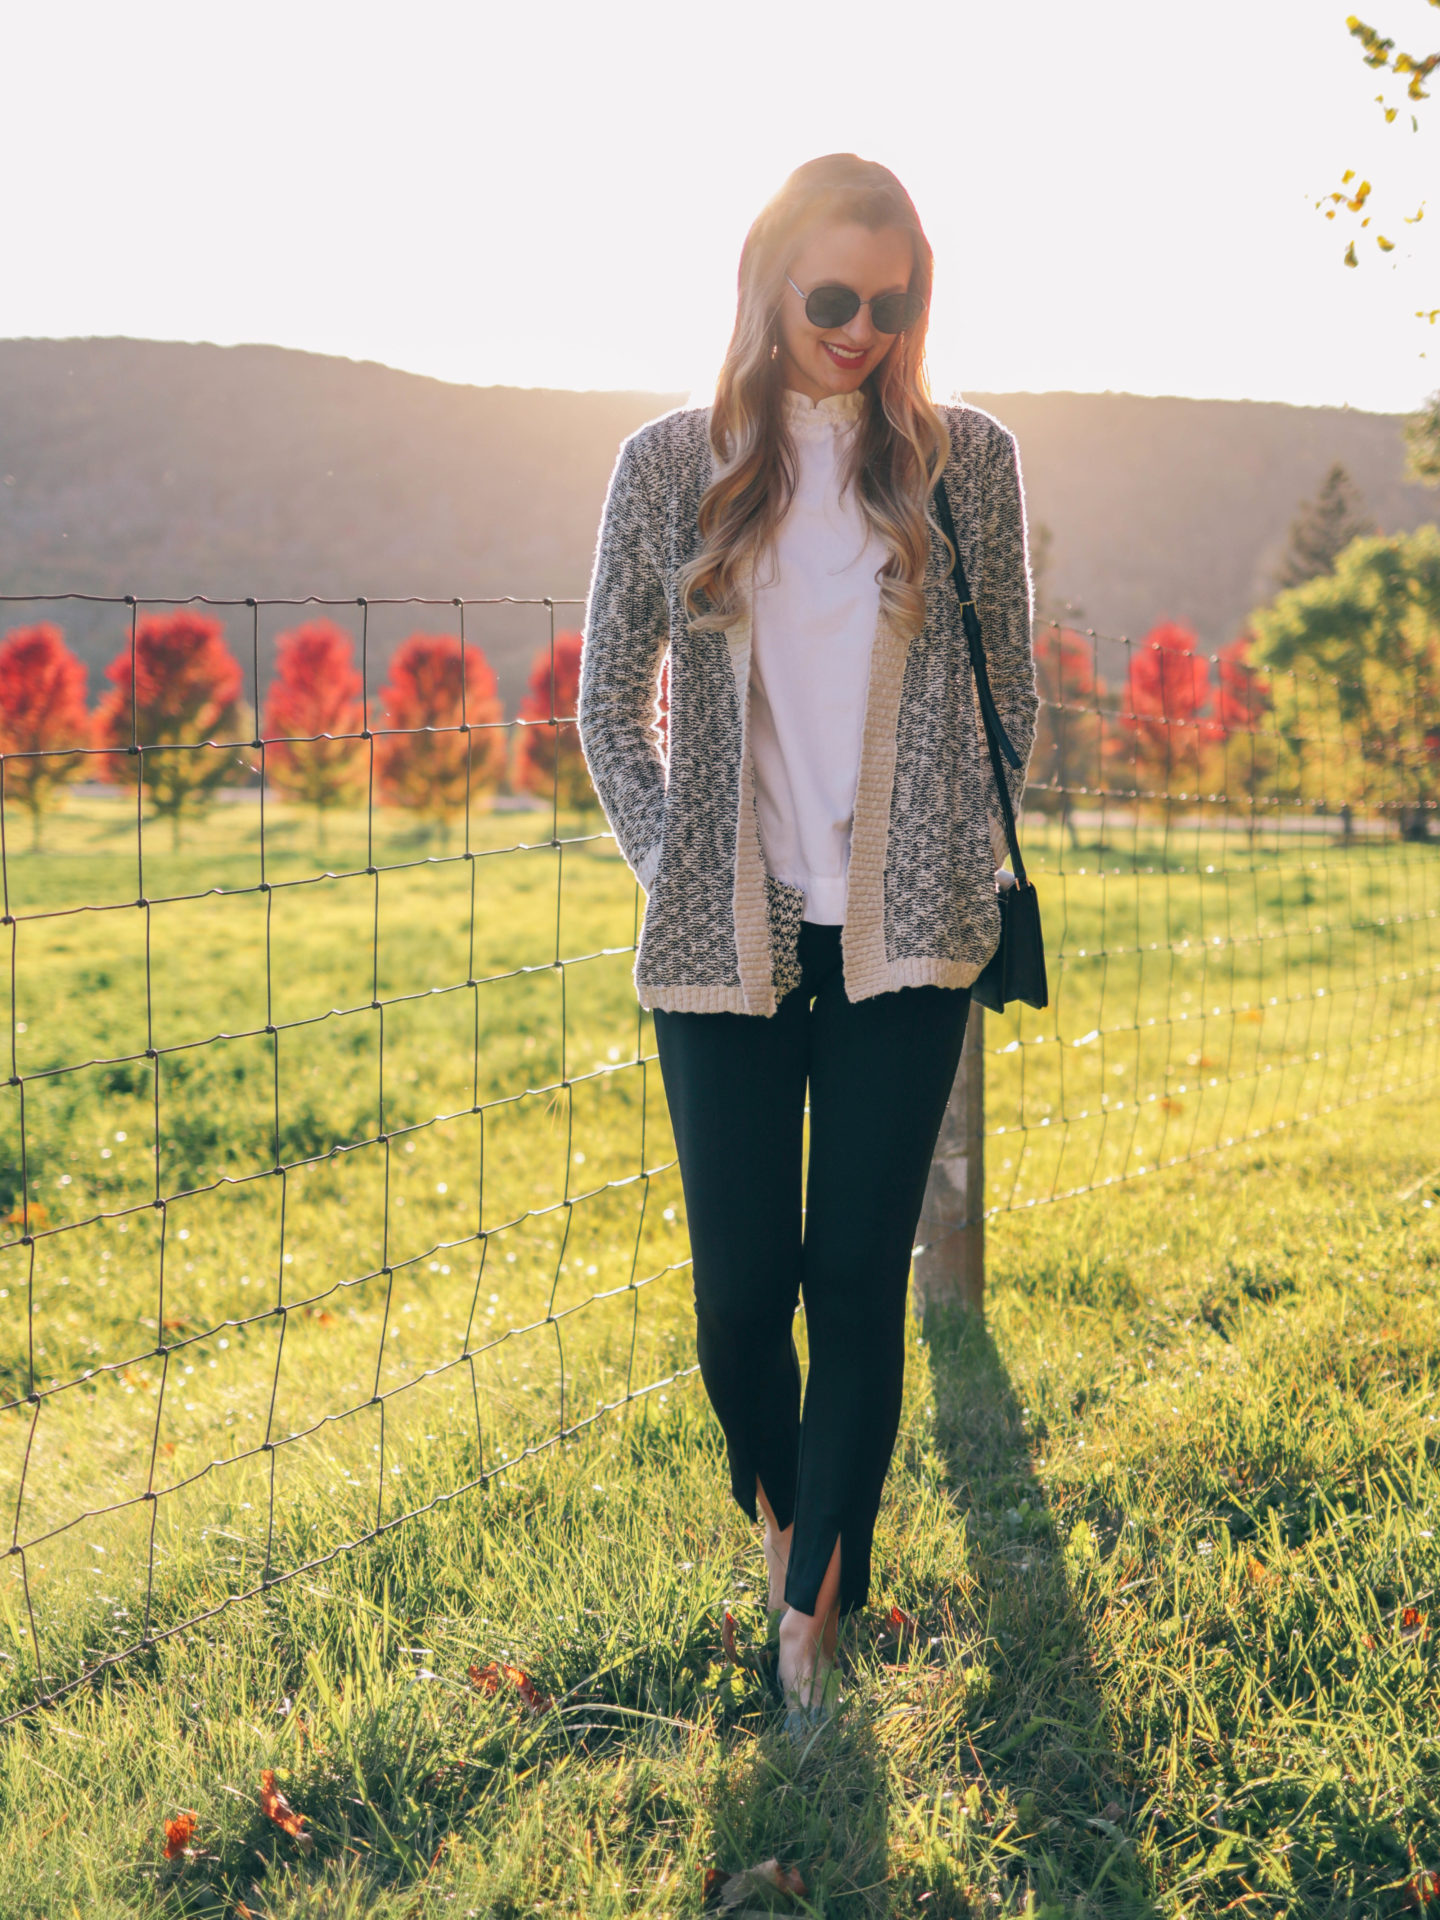 Style blogger, Leigha Gardner, of The Lilac Press on golden hour in the Berkshires and a cozy sweater